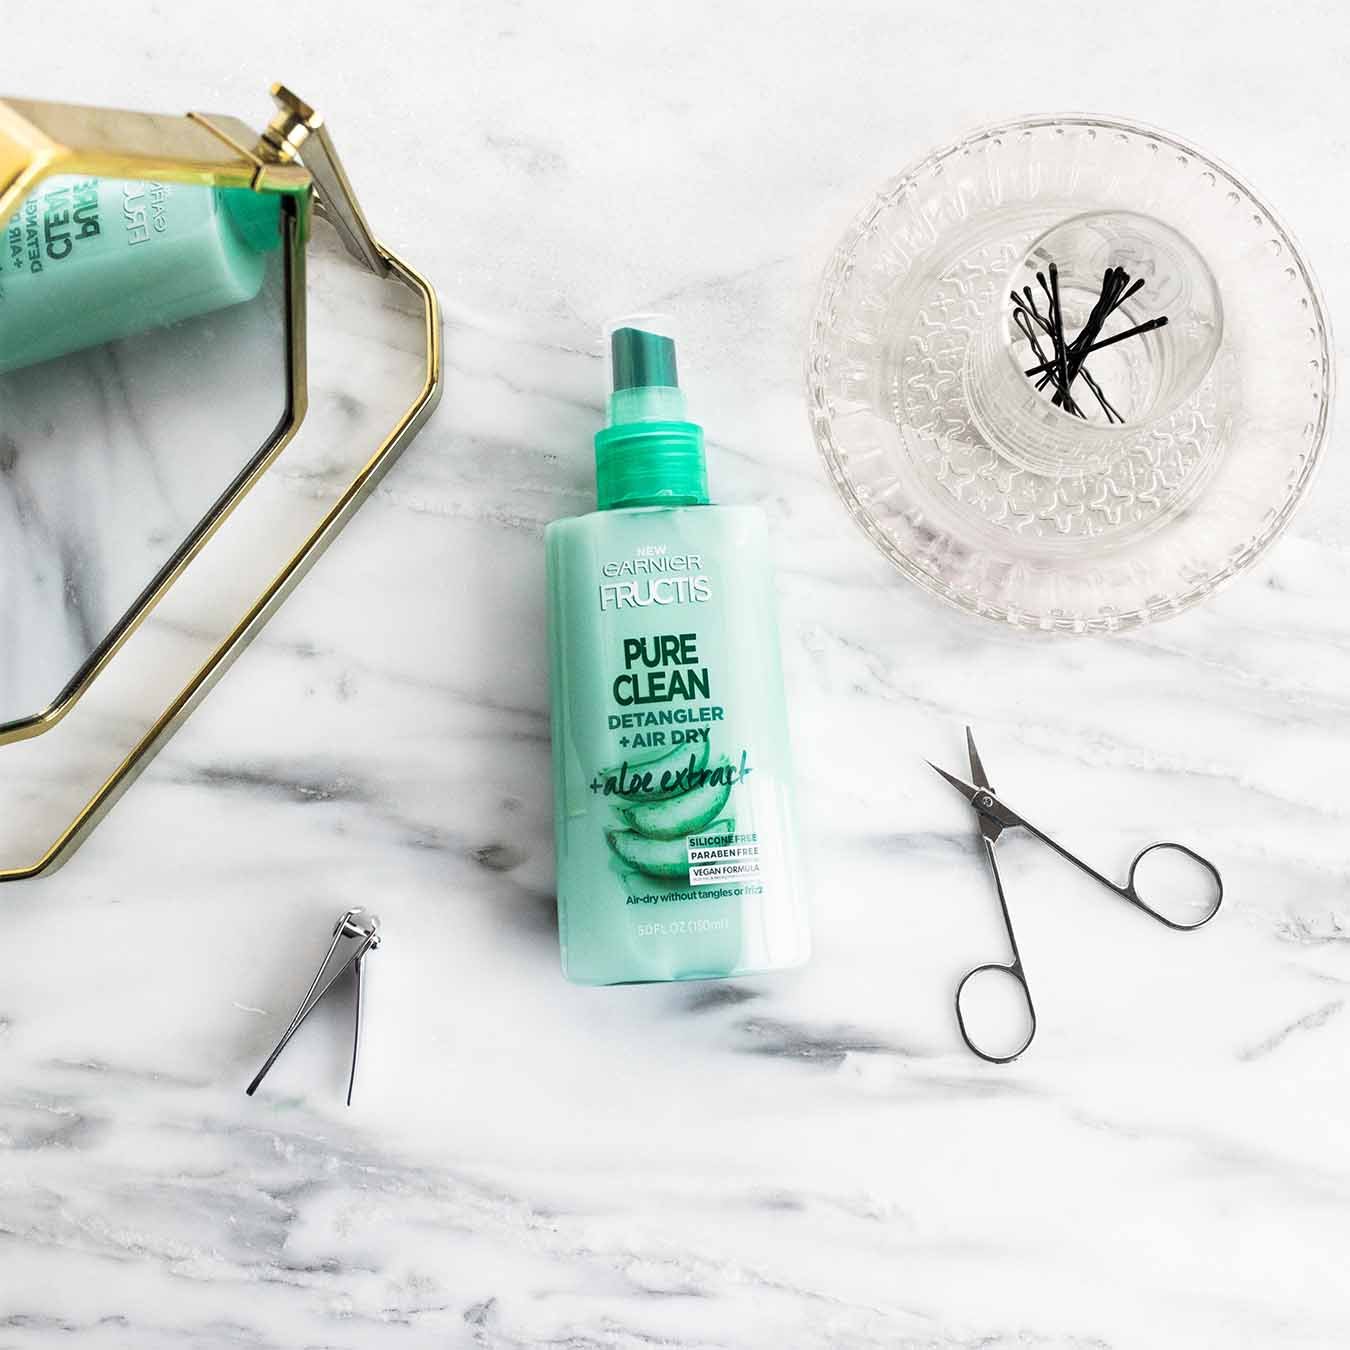 Garnier Fructis Pure Clean Detangler with Aloe Extract reflected in a gold mirror on white marble next to facial hair scissors, fingernail clippers, and a glass cup filled with bobby pins sitting on a glass plate. 